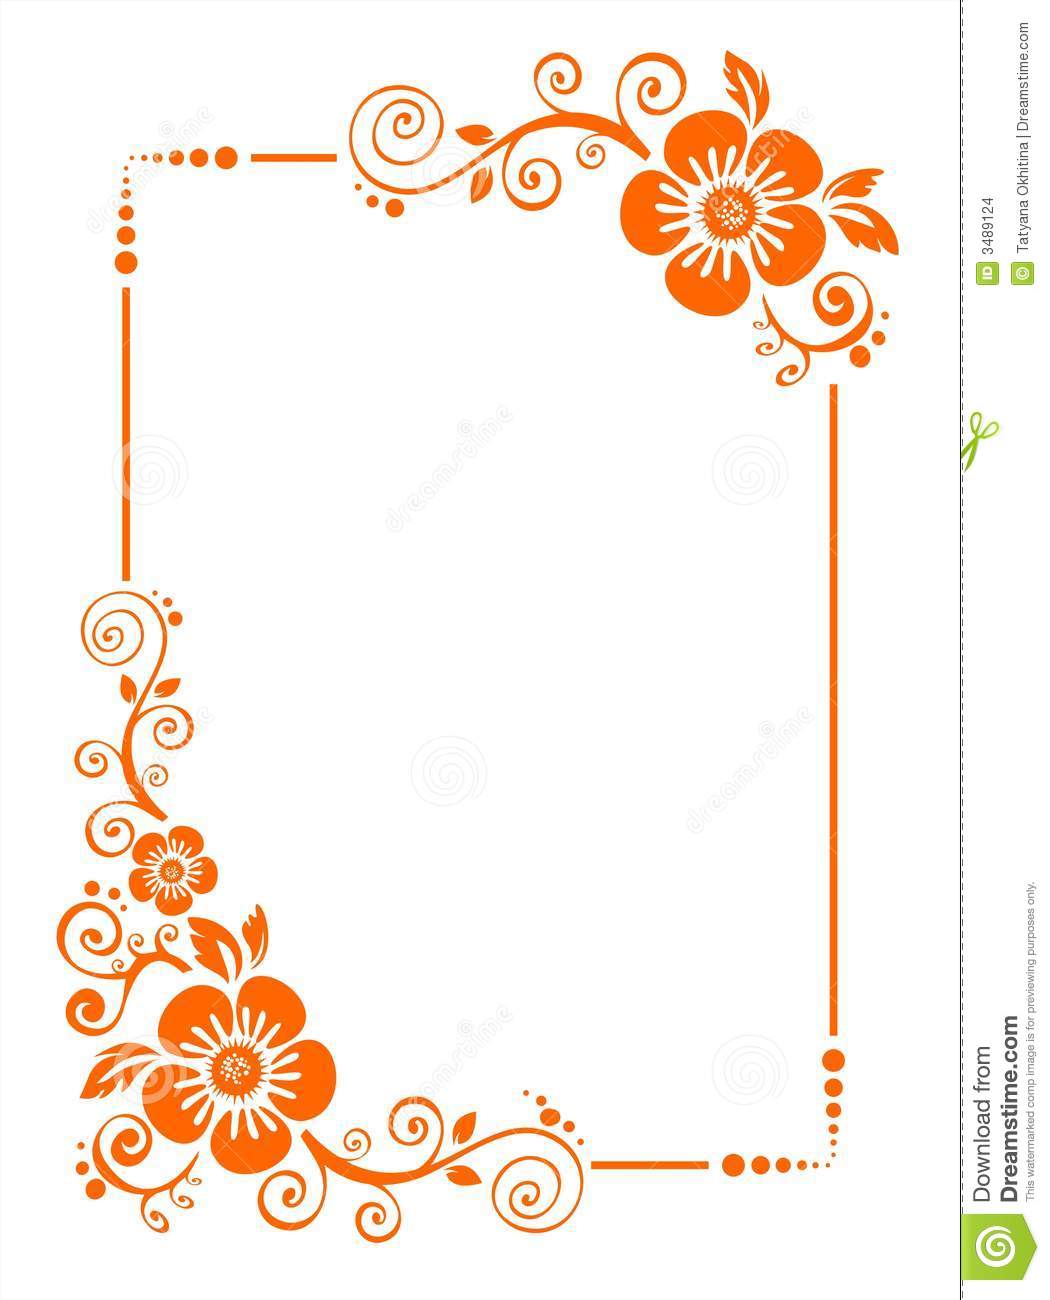 Orange Frame From Decorative Flowers On A White Background